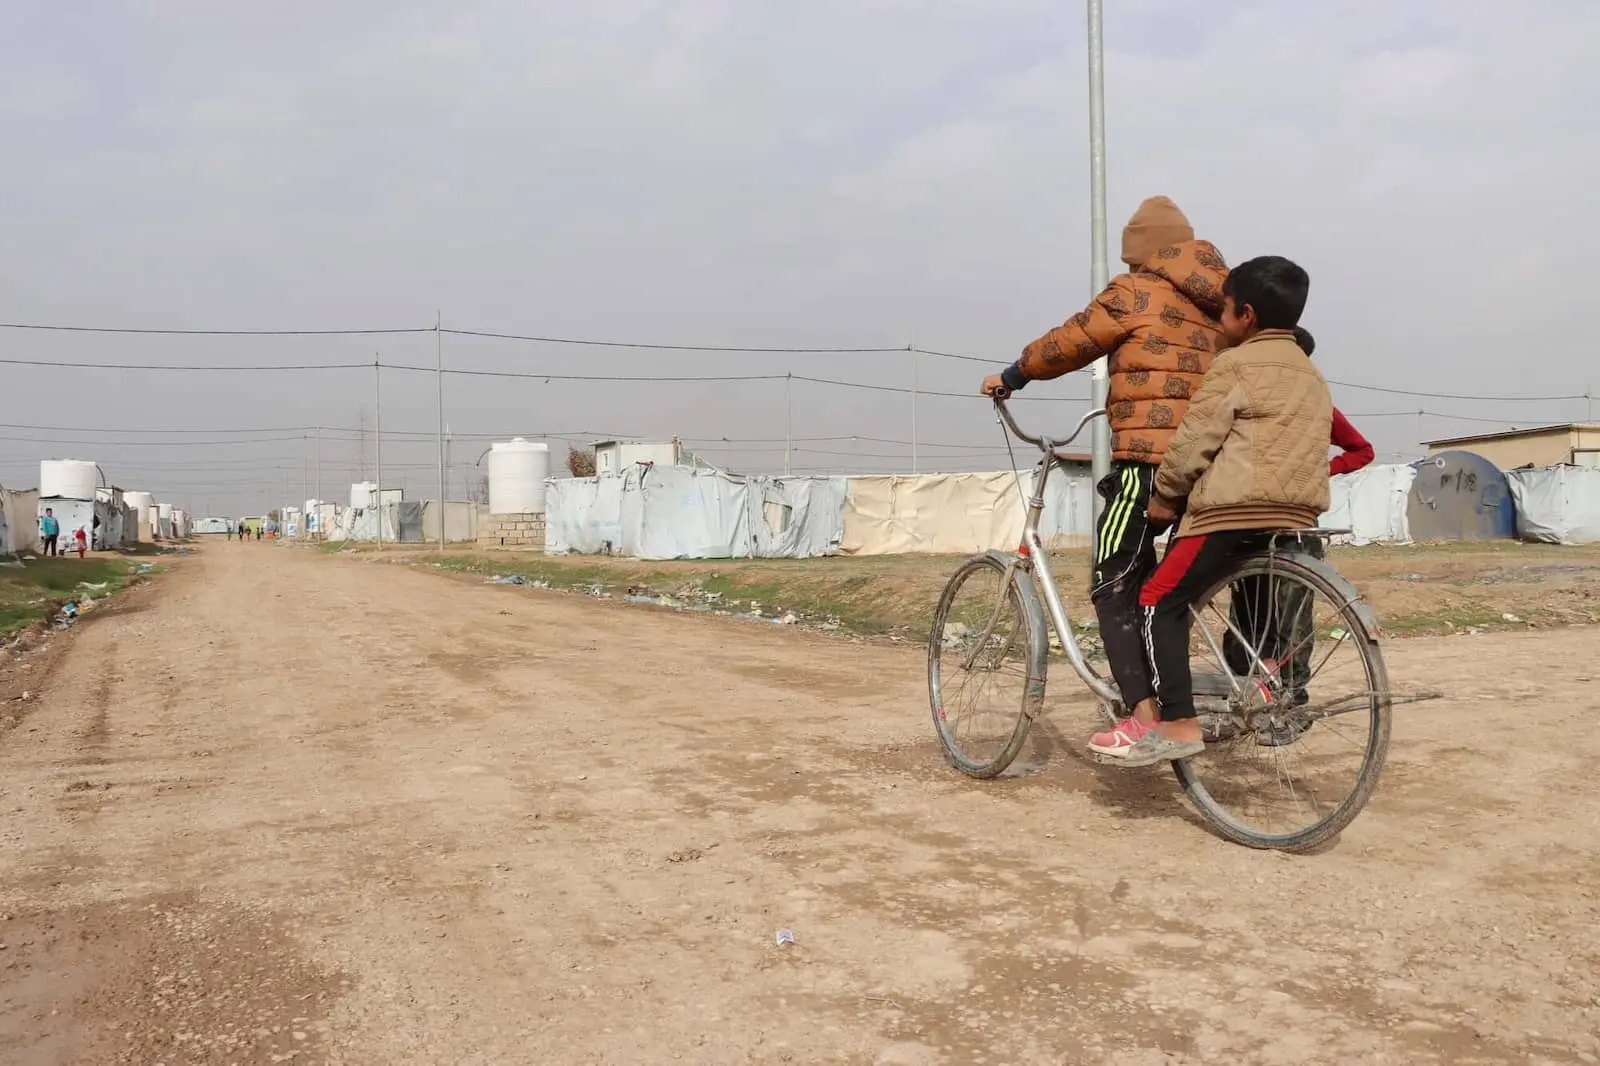 Refugee children on a bicycle